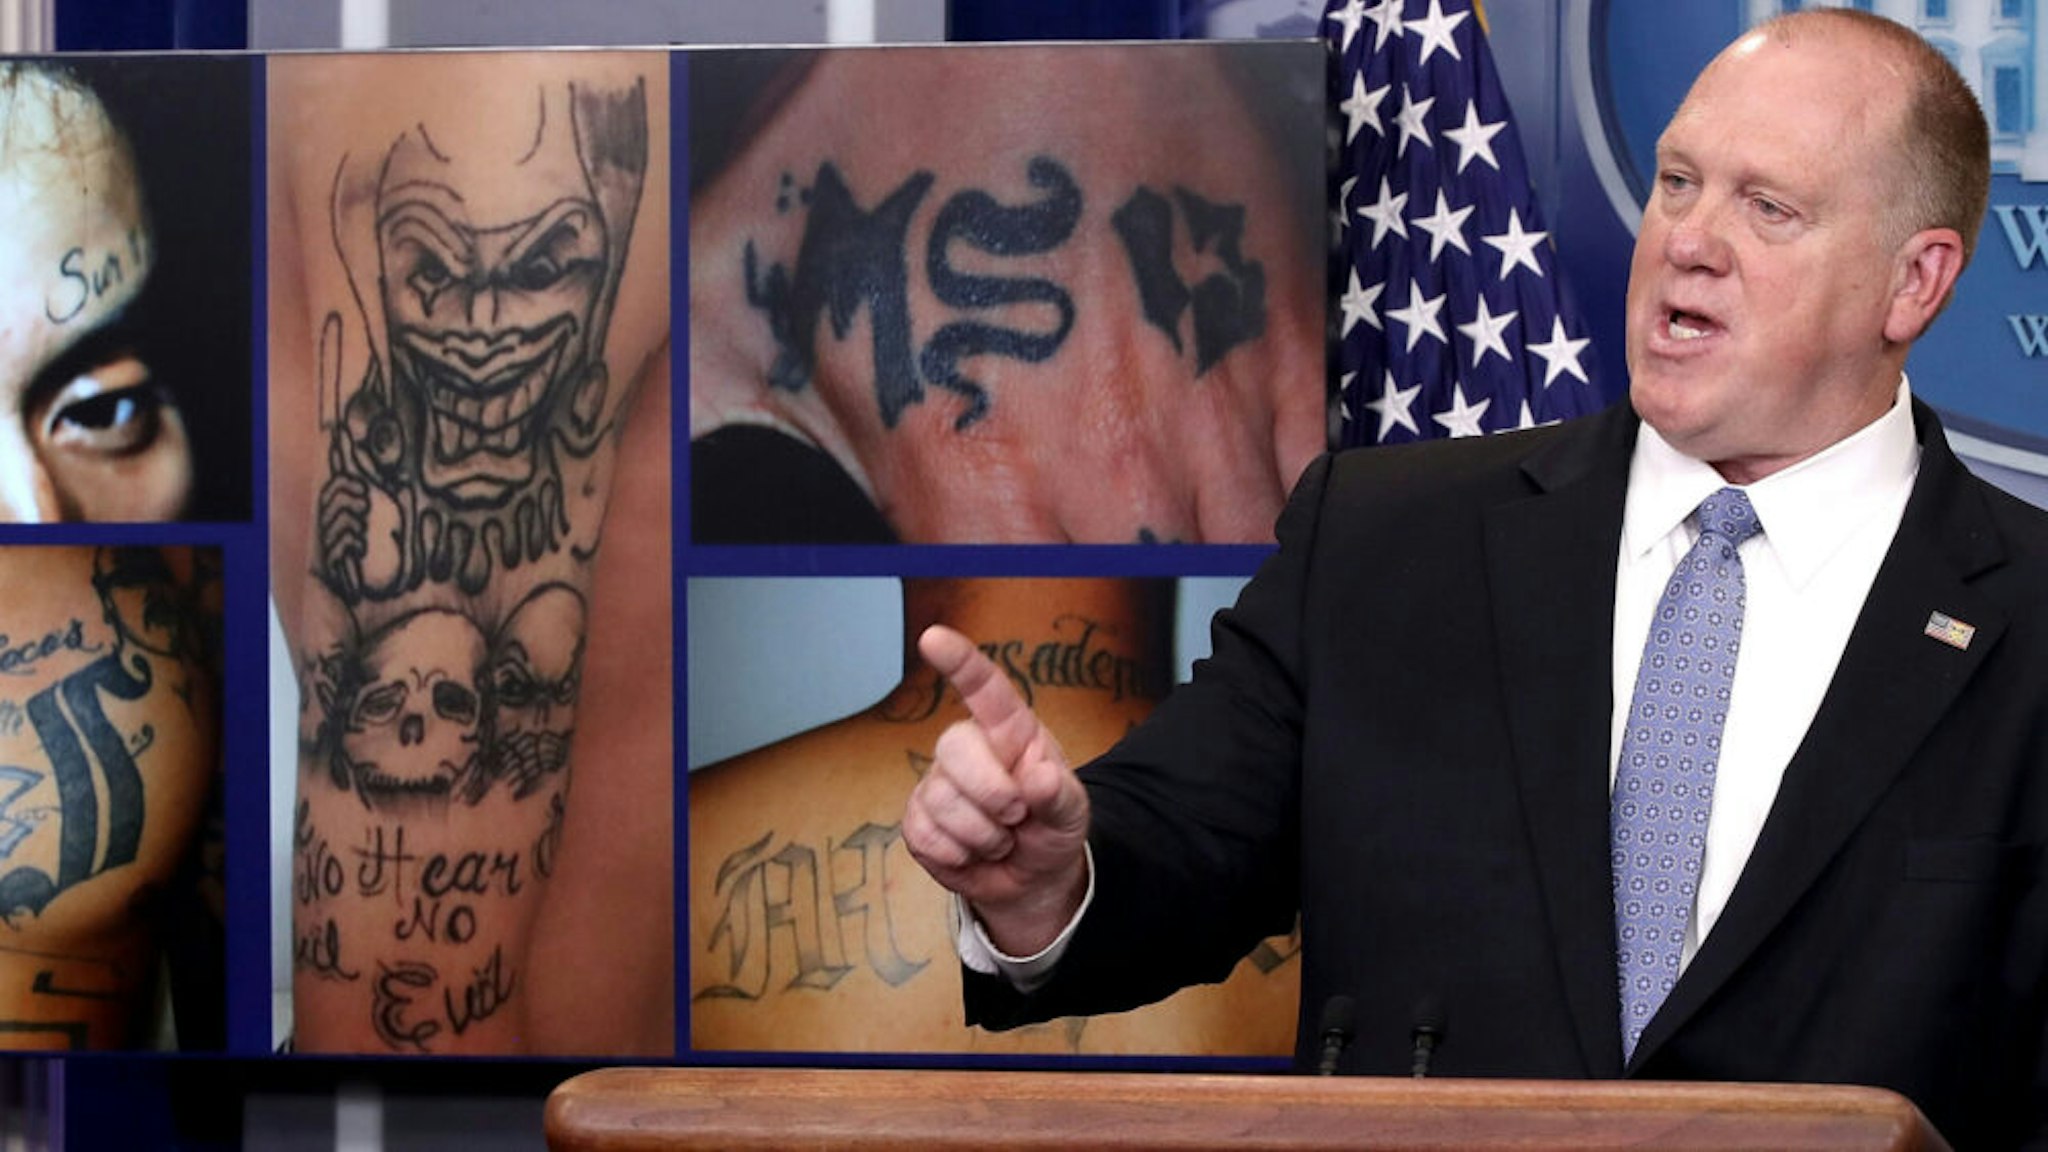 WASHINGTON, DC - JULY 27: Tom Homan, Director of Immigration and Customs Enforcement, answers questions in front of gang related photos from the MS-13 gang during a daily briefing at the White House July 27, 2017 in Washington, DC. Homan answered a range of questions during the briefing.